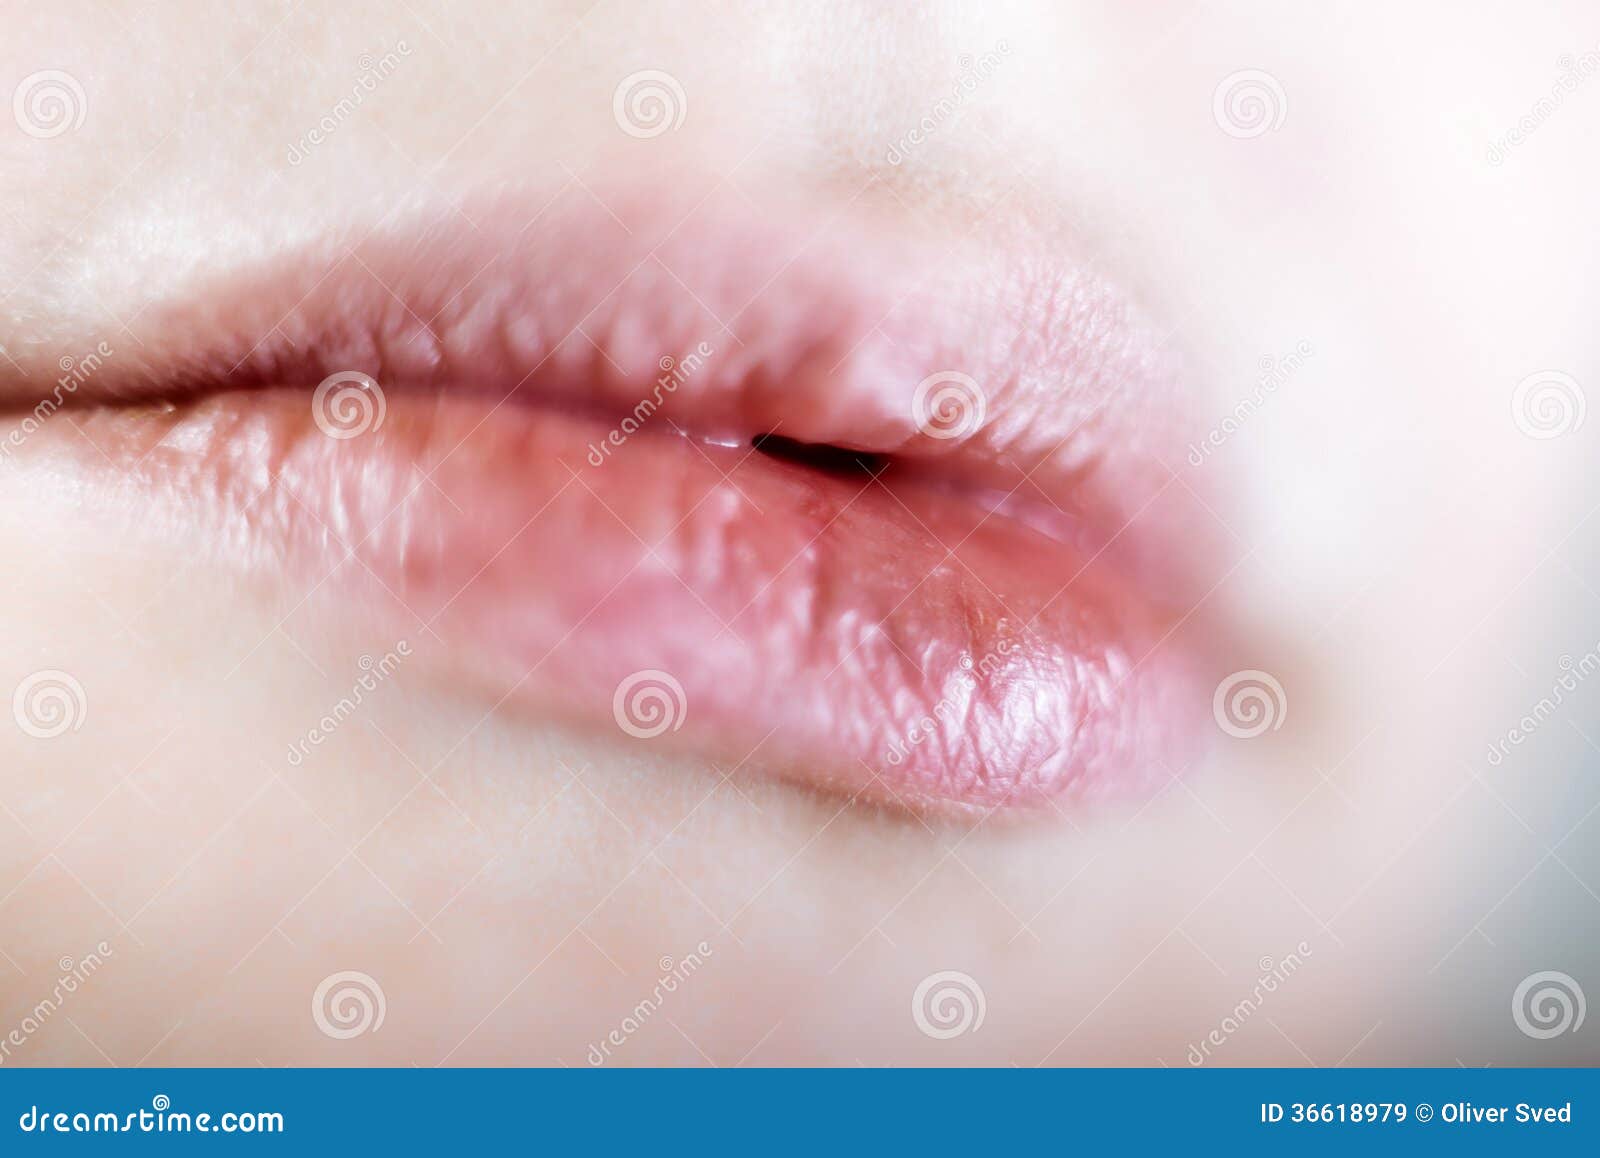 The Lips Of My Beautiful And Beloved Girlfriend Stock Image Image Of